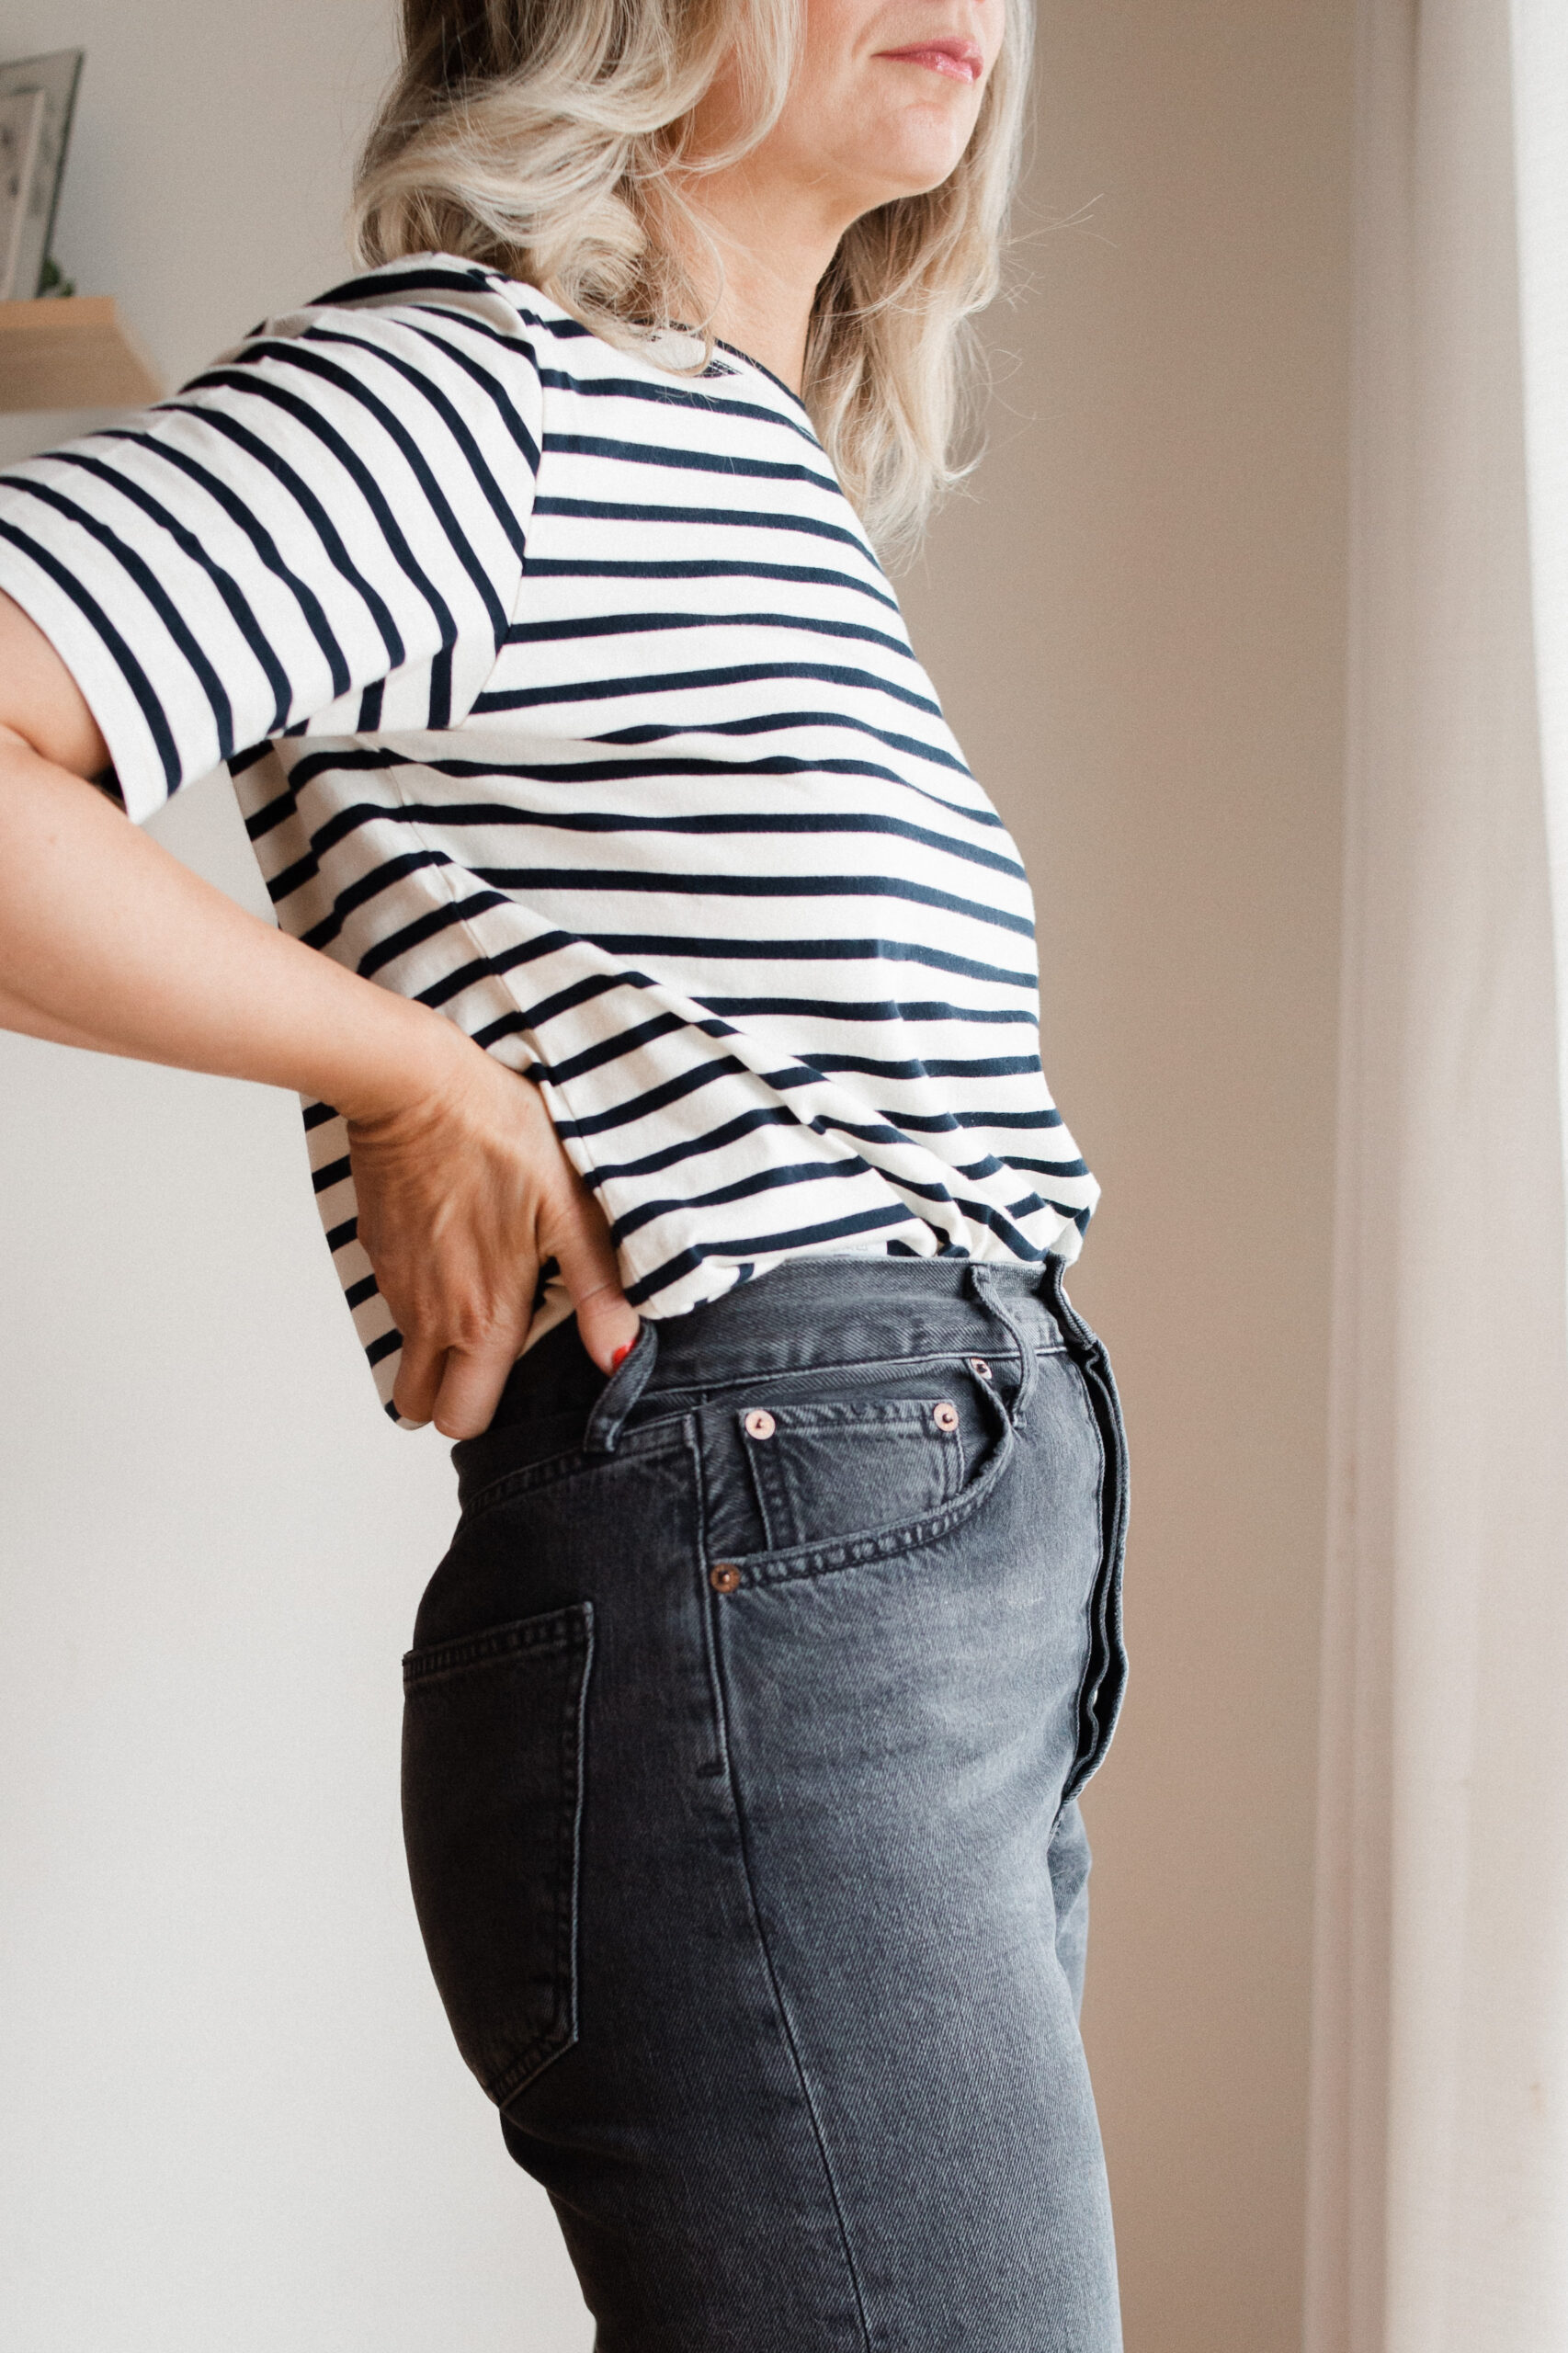 Karin Emily wears a pair of AGOLDE 90's midrise jeans with a striped tee and brown sandals for her AGOLDE denim guide